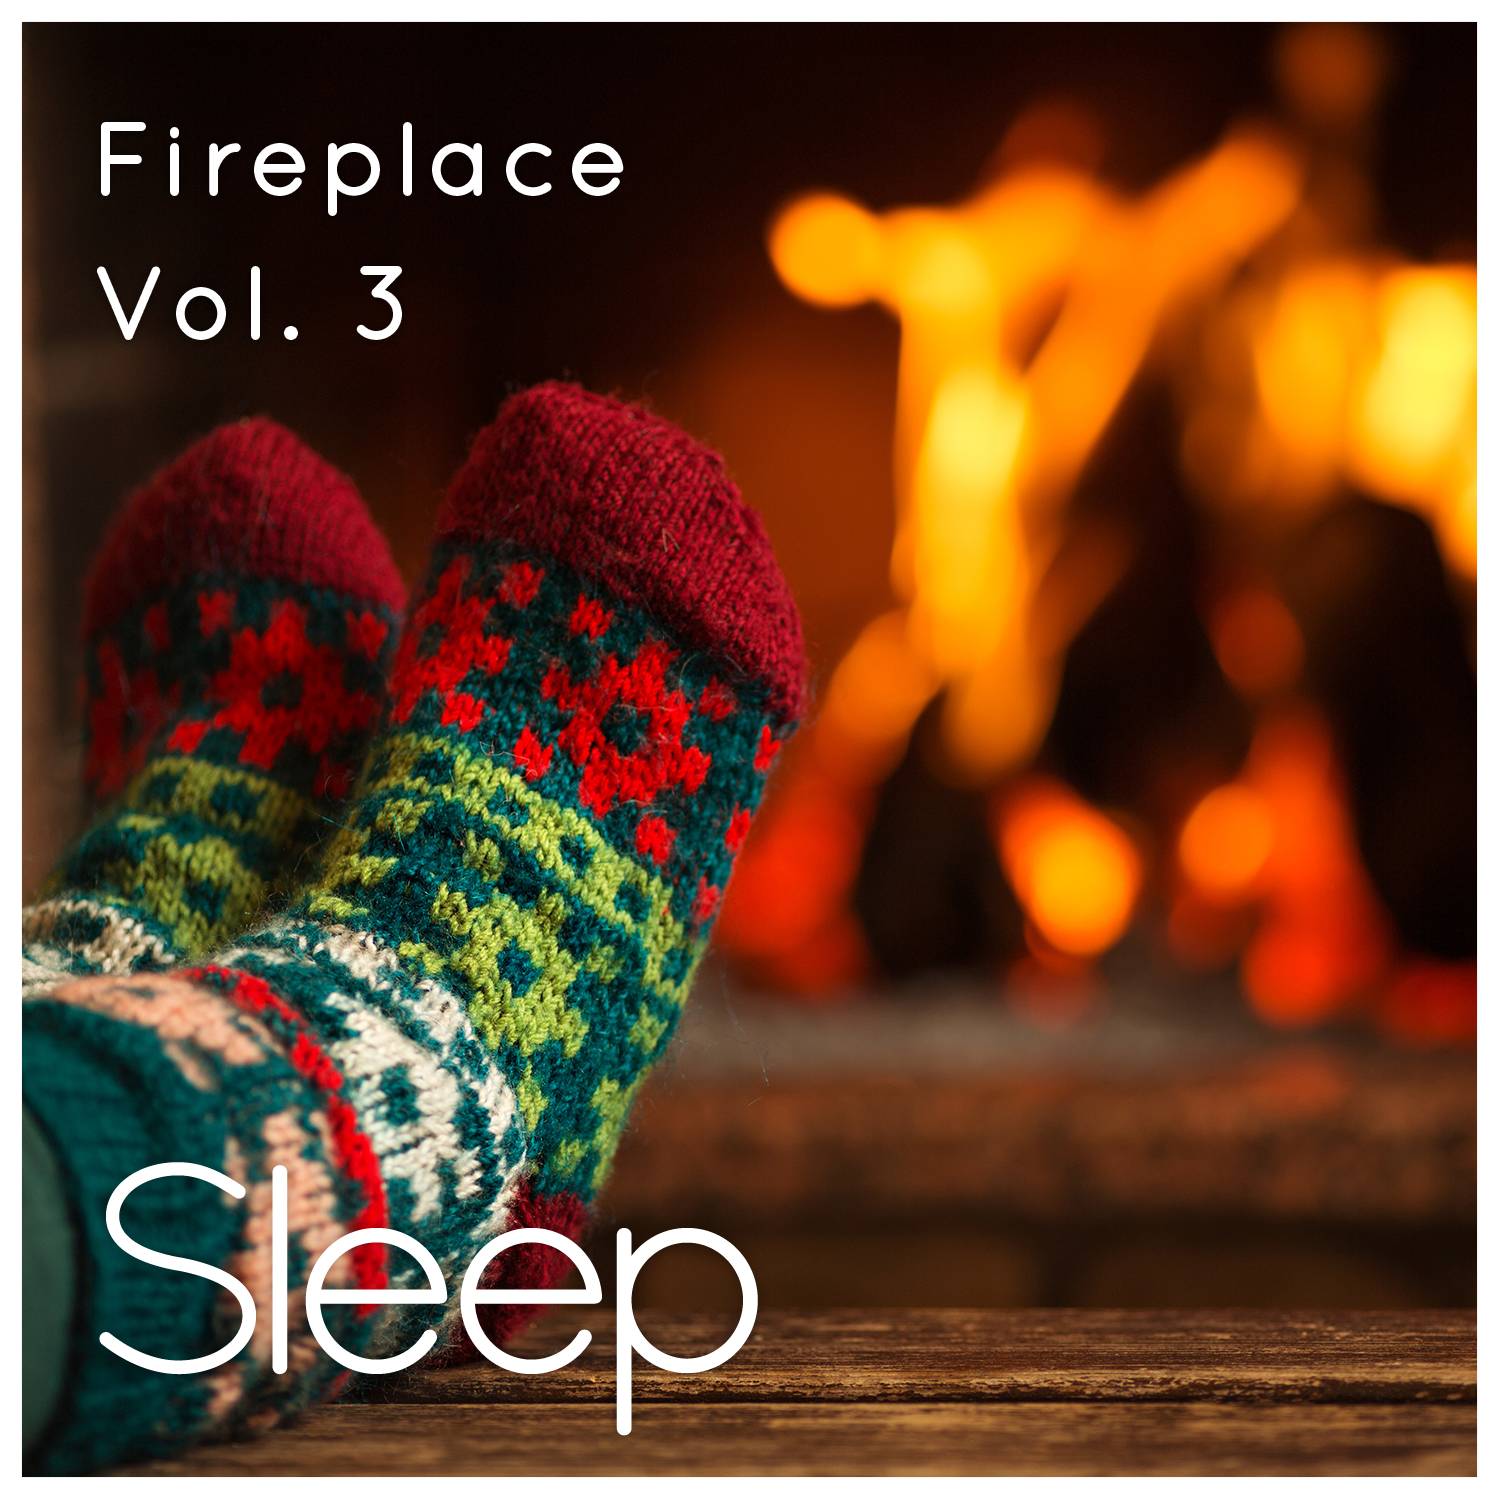 Sleep by Fireplace in Cabin, Vol. 3